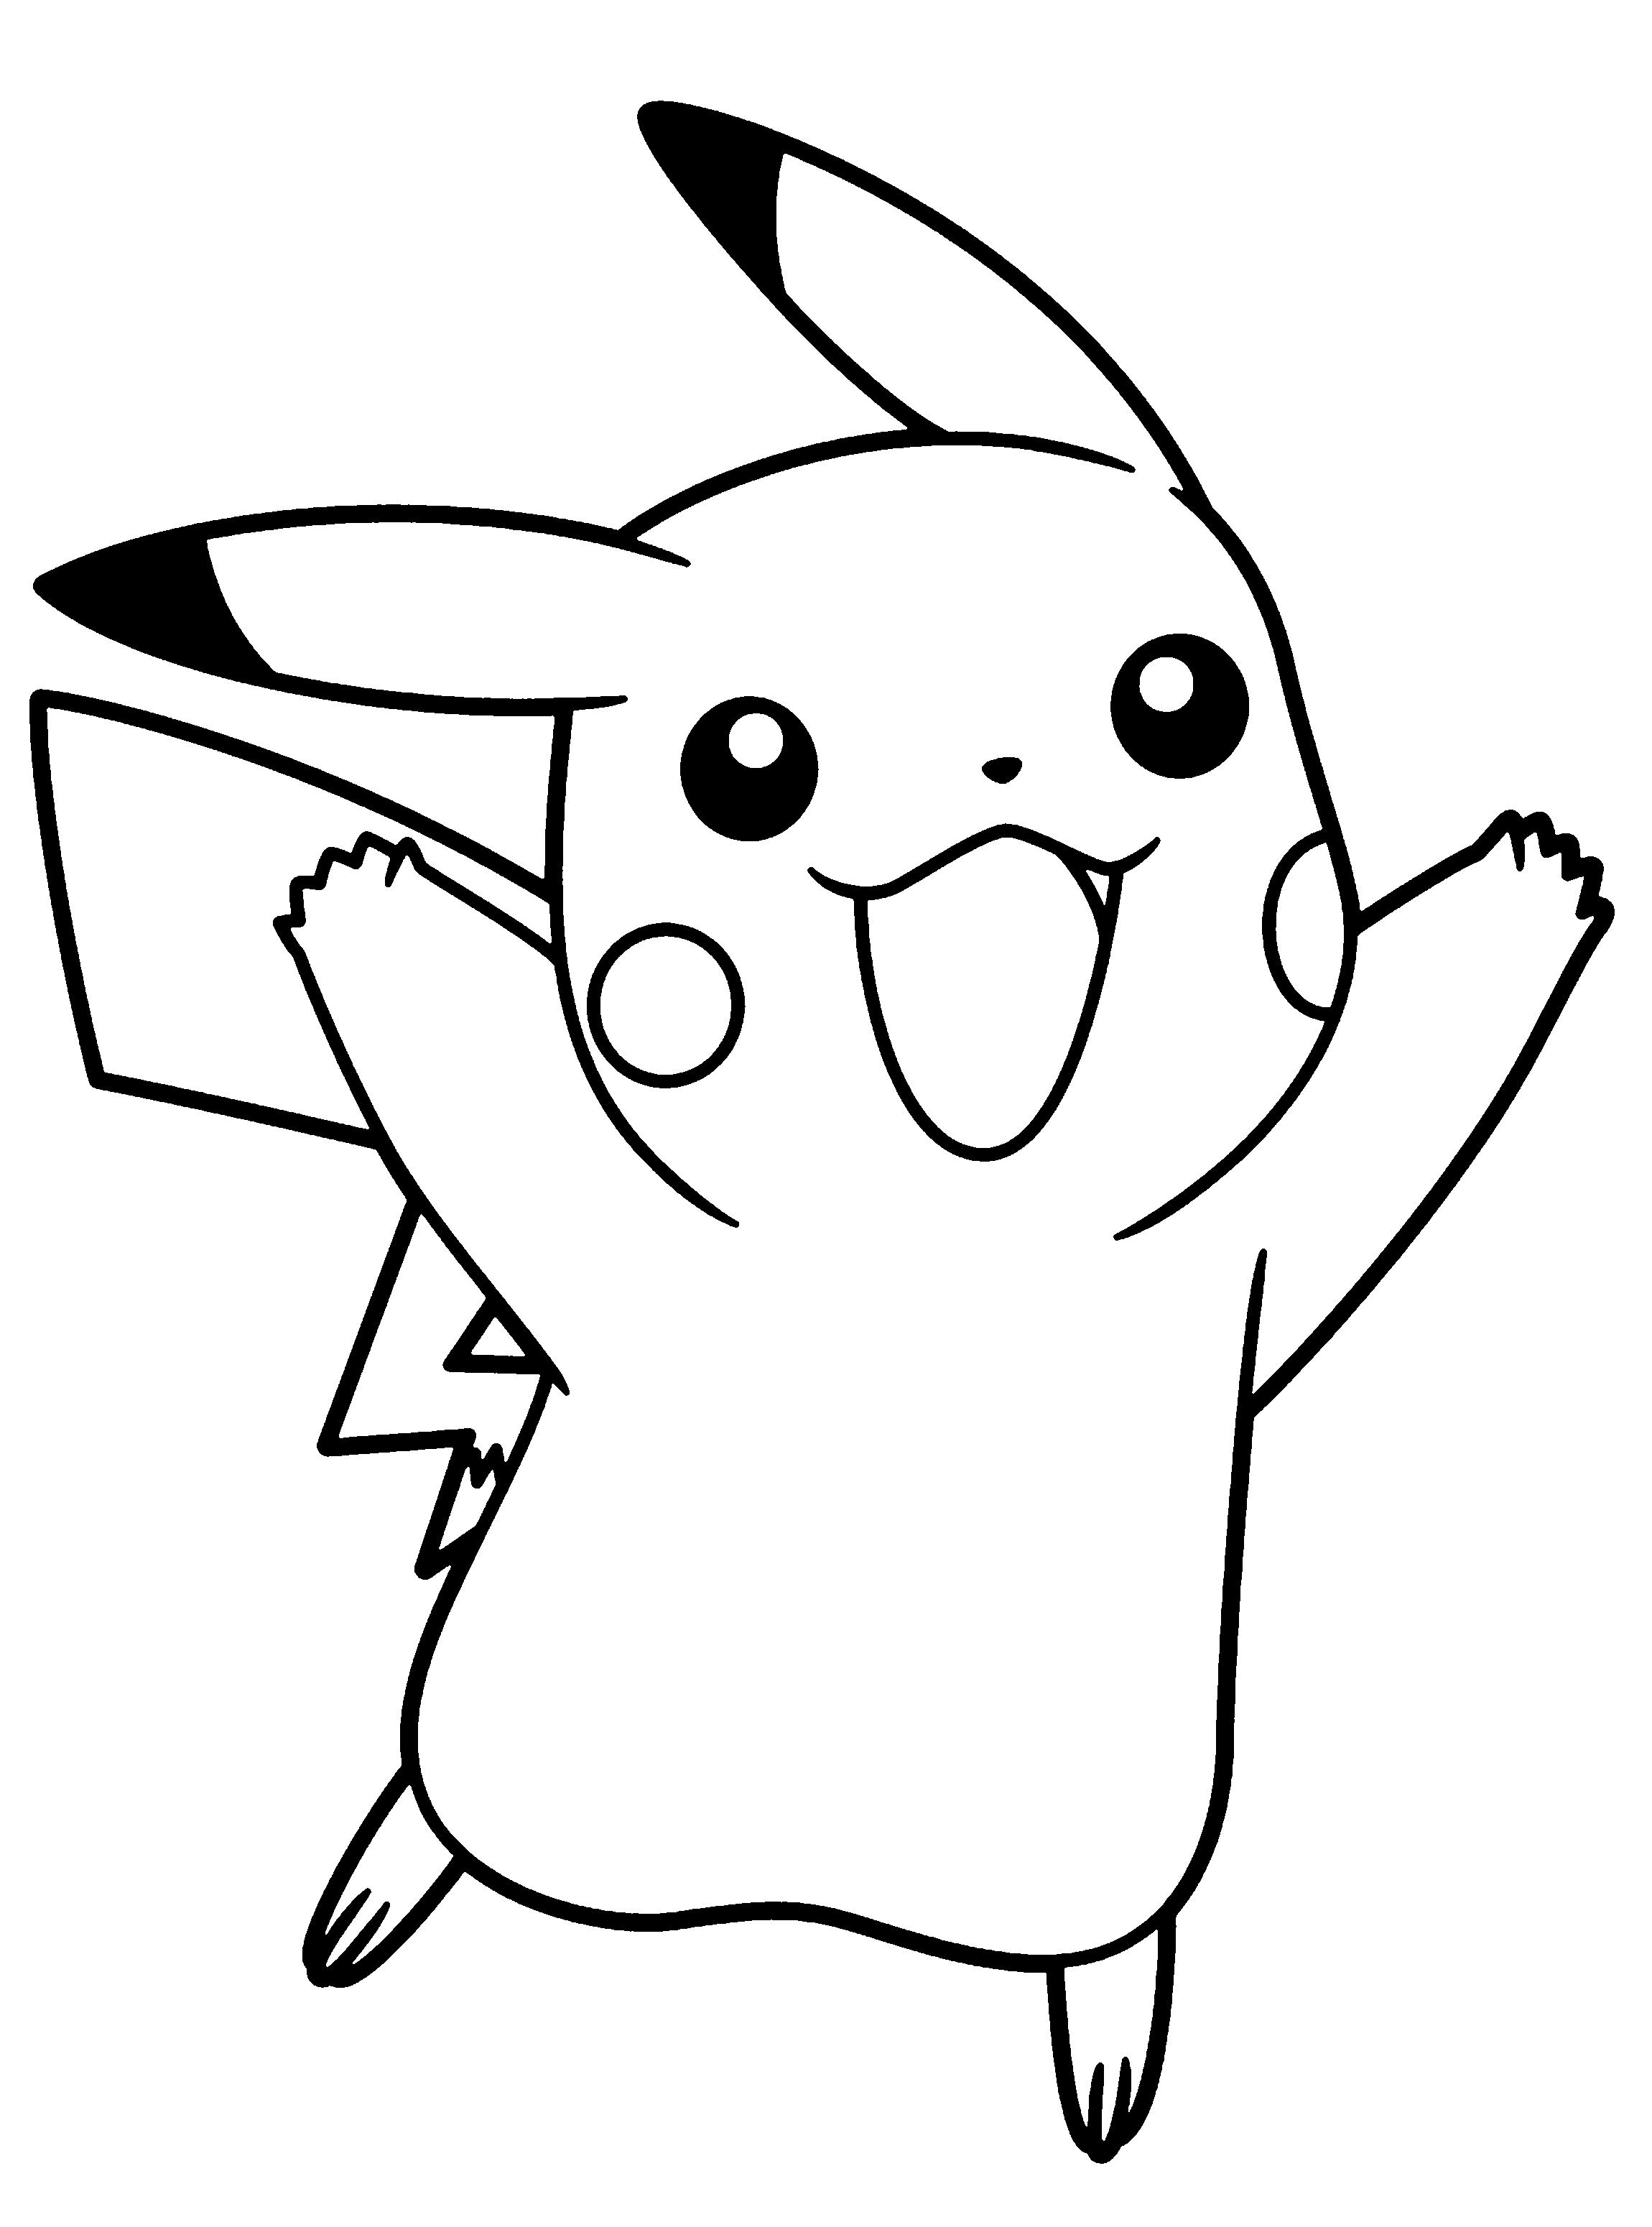 Pikachu coloring pages to download and print for free ...